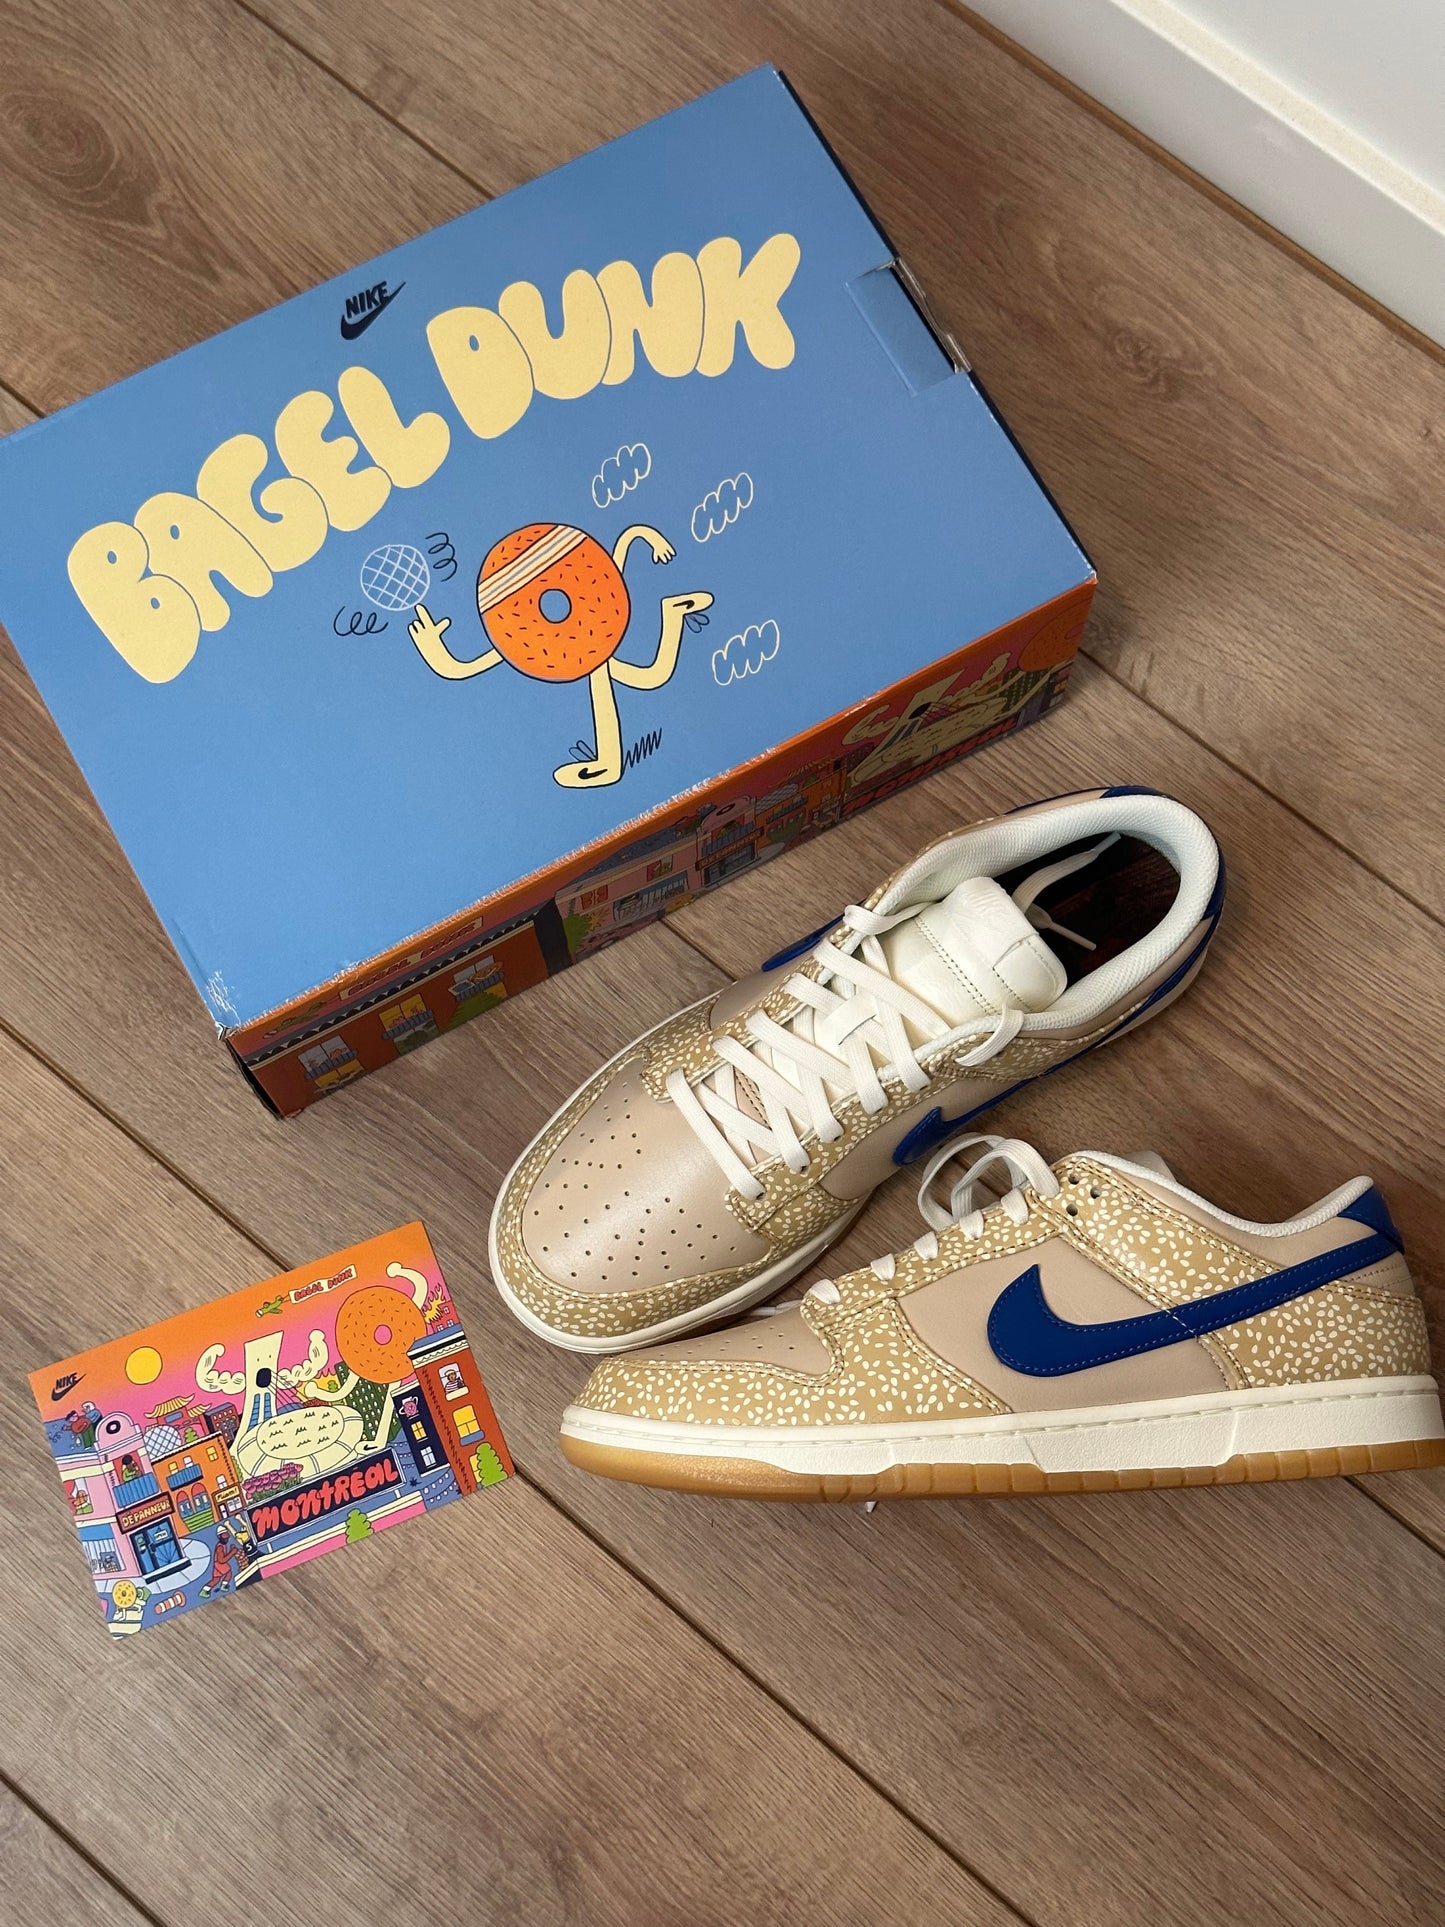 Nike Dunk Low Montreal Bagel Special Box